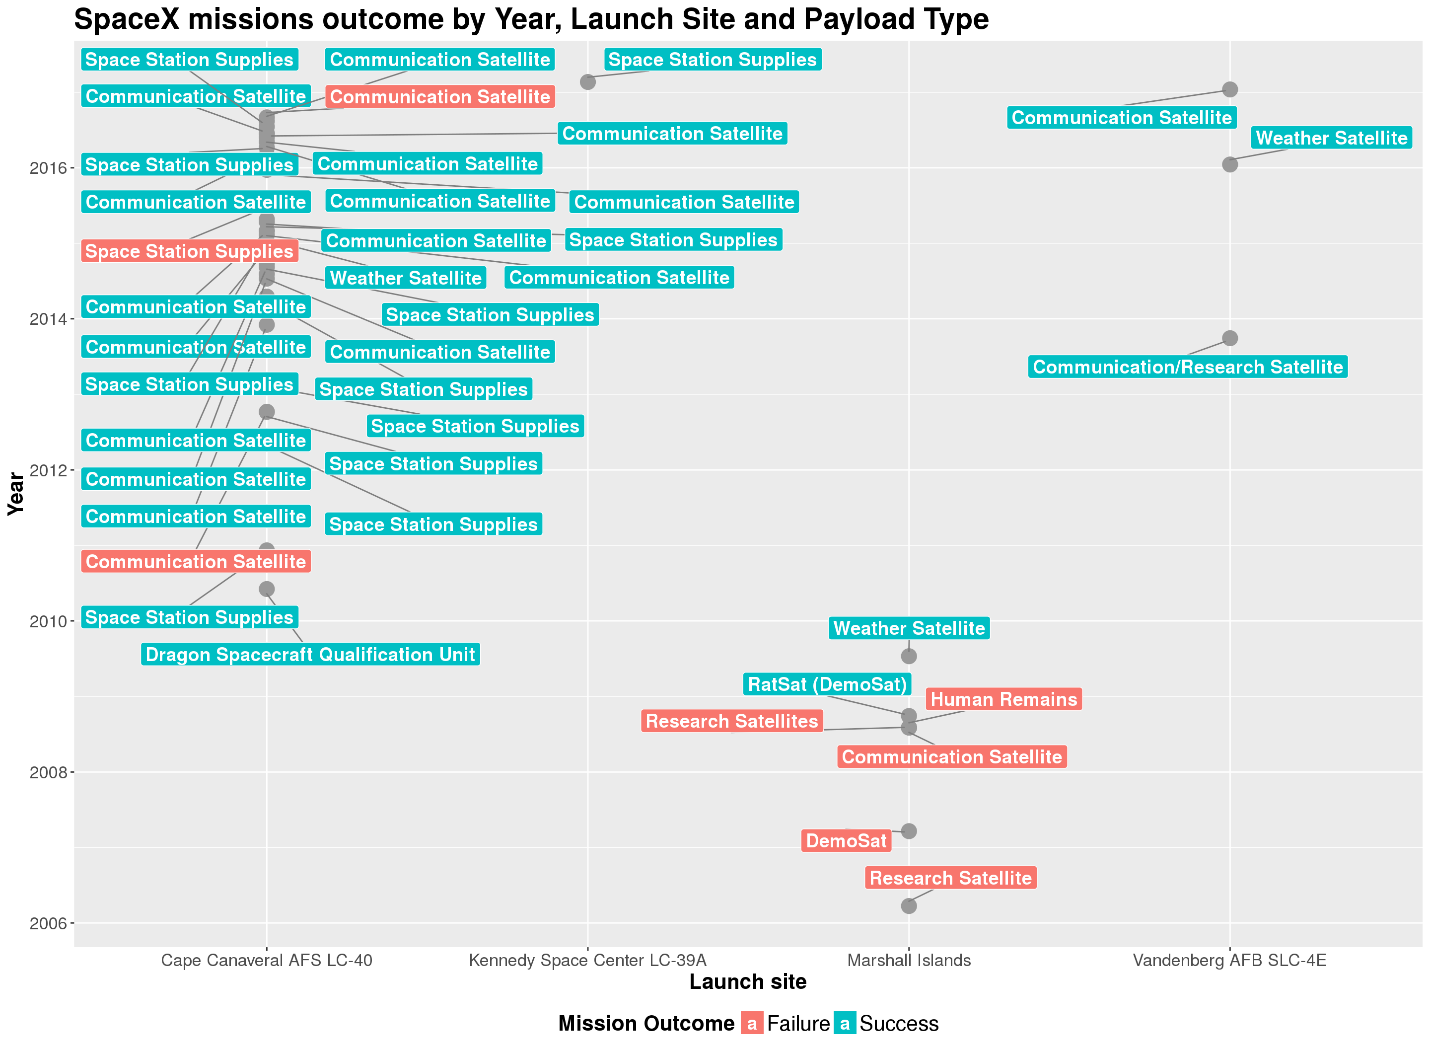 SpaceX Missions Outcome by Year, Launch Site and Payload type